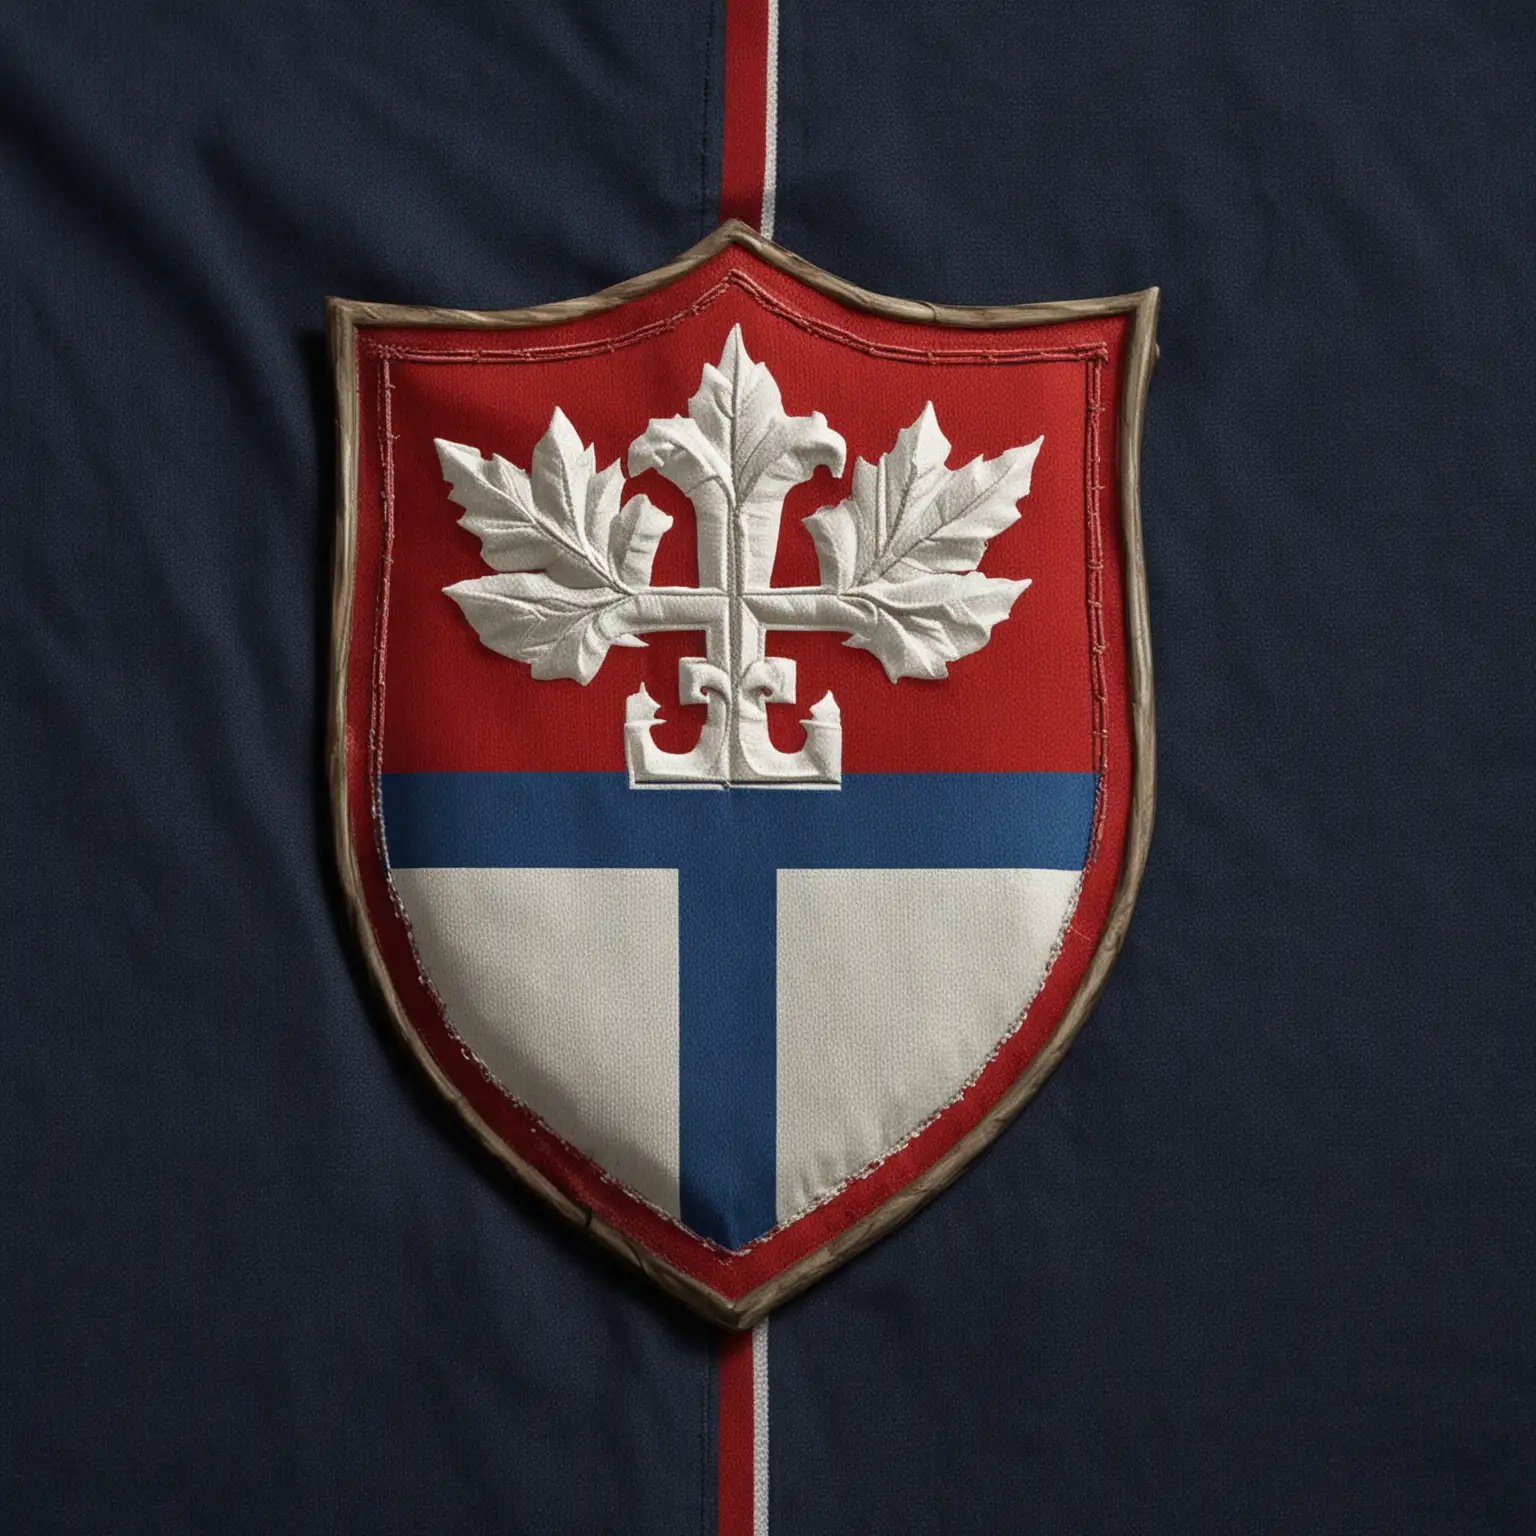 The image shows a close-up of a sports jersey featuring the emblem of Slovakia. The emblem is prominently displayed in the center of the image. The background of the emblem is a dark blue fabric with thin, horizontal white lines running across it, giving it a textured appearance.

The Slovak emblem itself is a shield with a red background. In the center of the shield is a white double cross (patriarchal cross) standing on three blue hills. The design is bold and clear, with the white double cross contrasting sharply against the red background of the shield. The blue hills at the bottom of the shield are stylized and form a rounded shape, adding a visual balance to the emblem.

The upper part of the image has a horizontal red stripe running along the top edge of the jersey, with a small portion of a white collar visible above it. The emblem is bordered by a white outline, which further enhances its visibility against the dark blue background.

The overall composition focuses on the details of the emblem and the texture of the fabric, highlighting the craftsmanship and design elements of the jersey. The colors are vivid, with the red, white, and blue elements representing the national colors of Slovakia. 